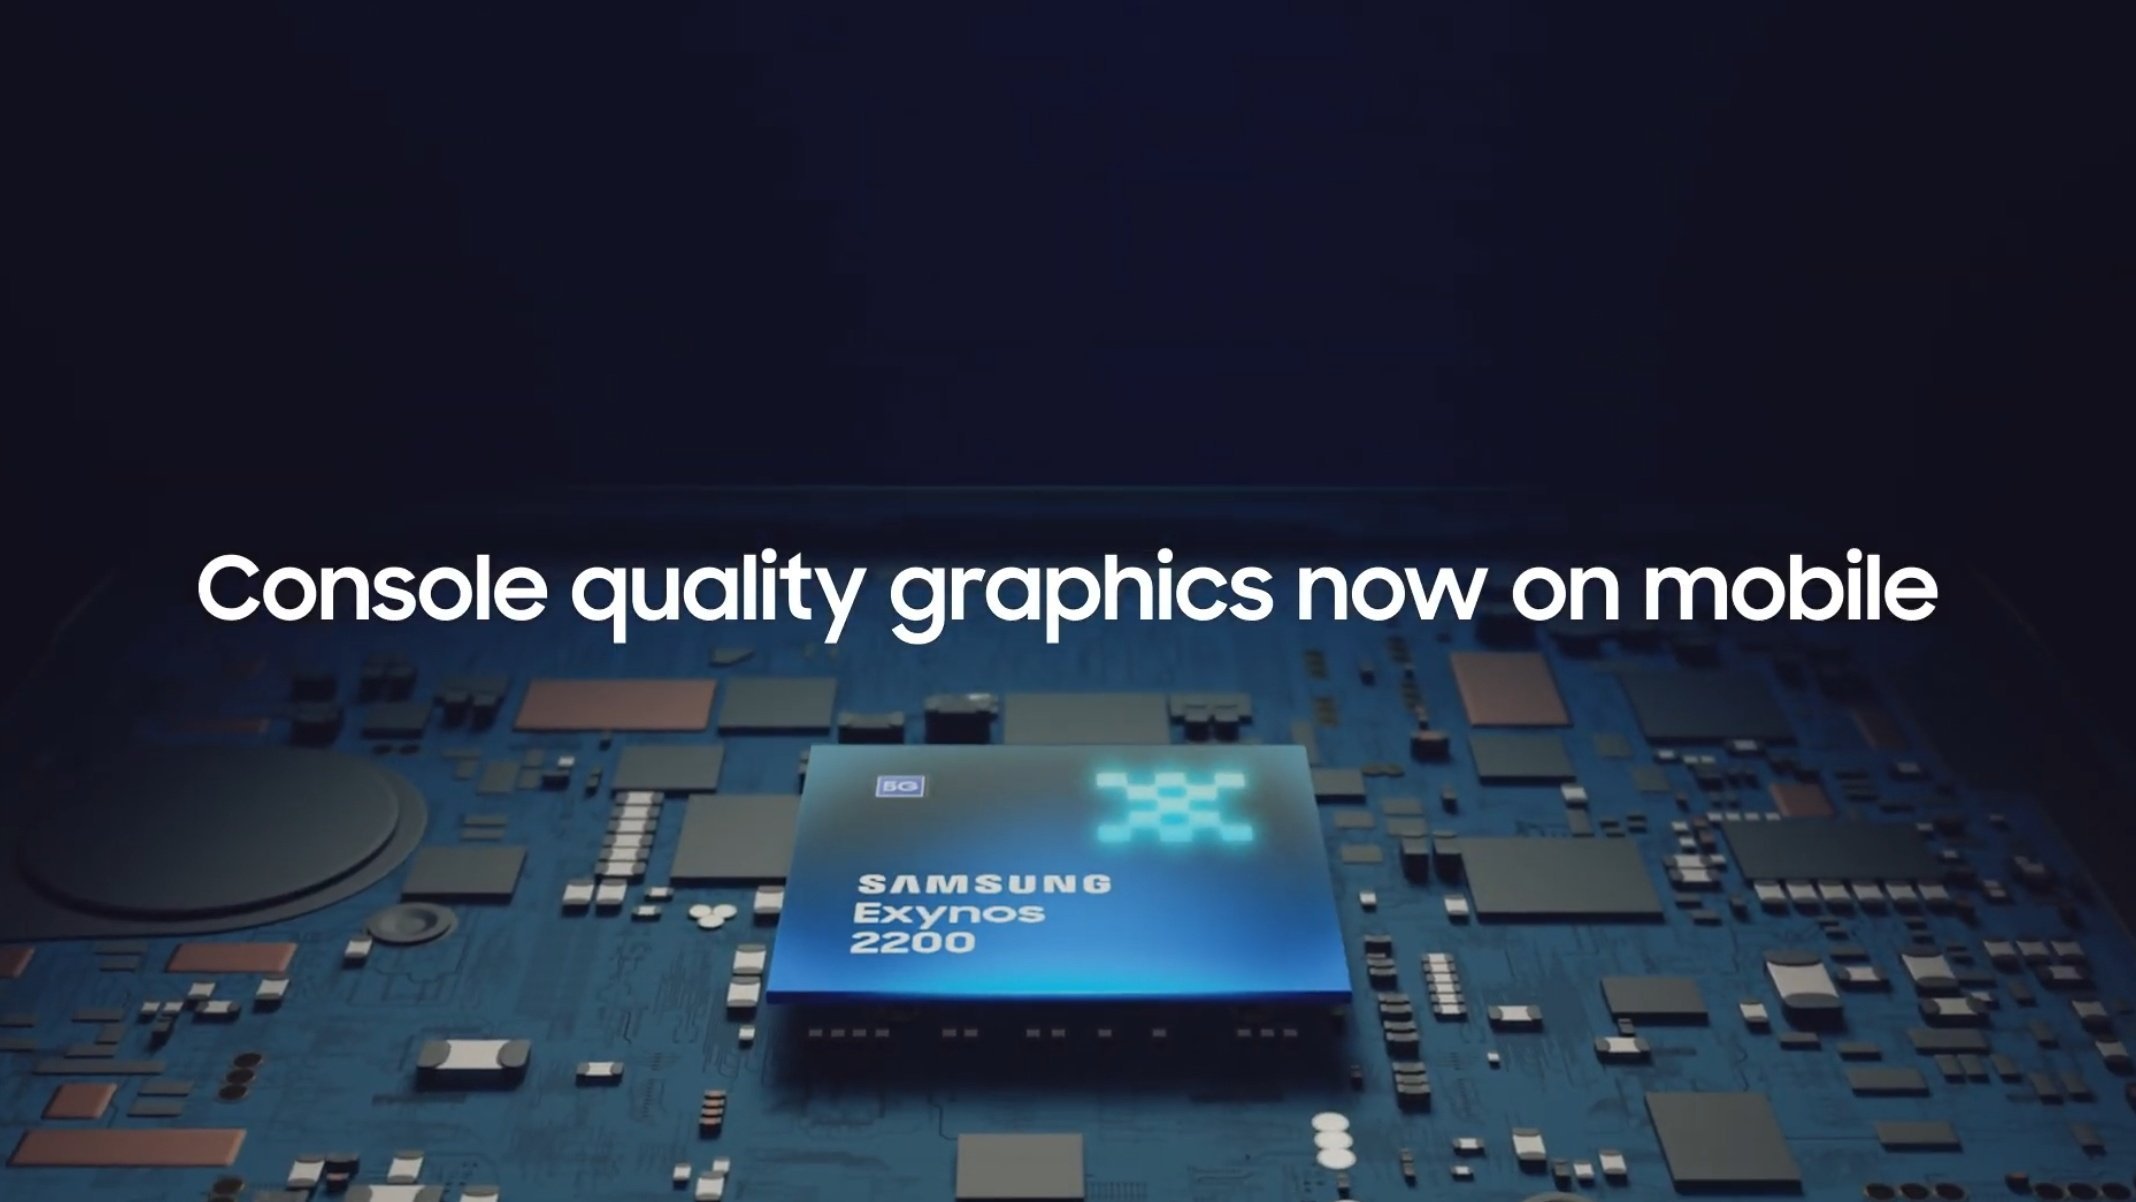 Exynos 2200 featured image